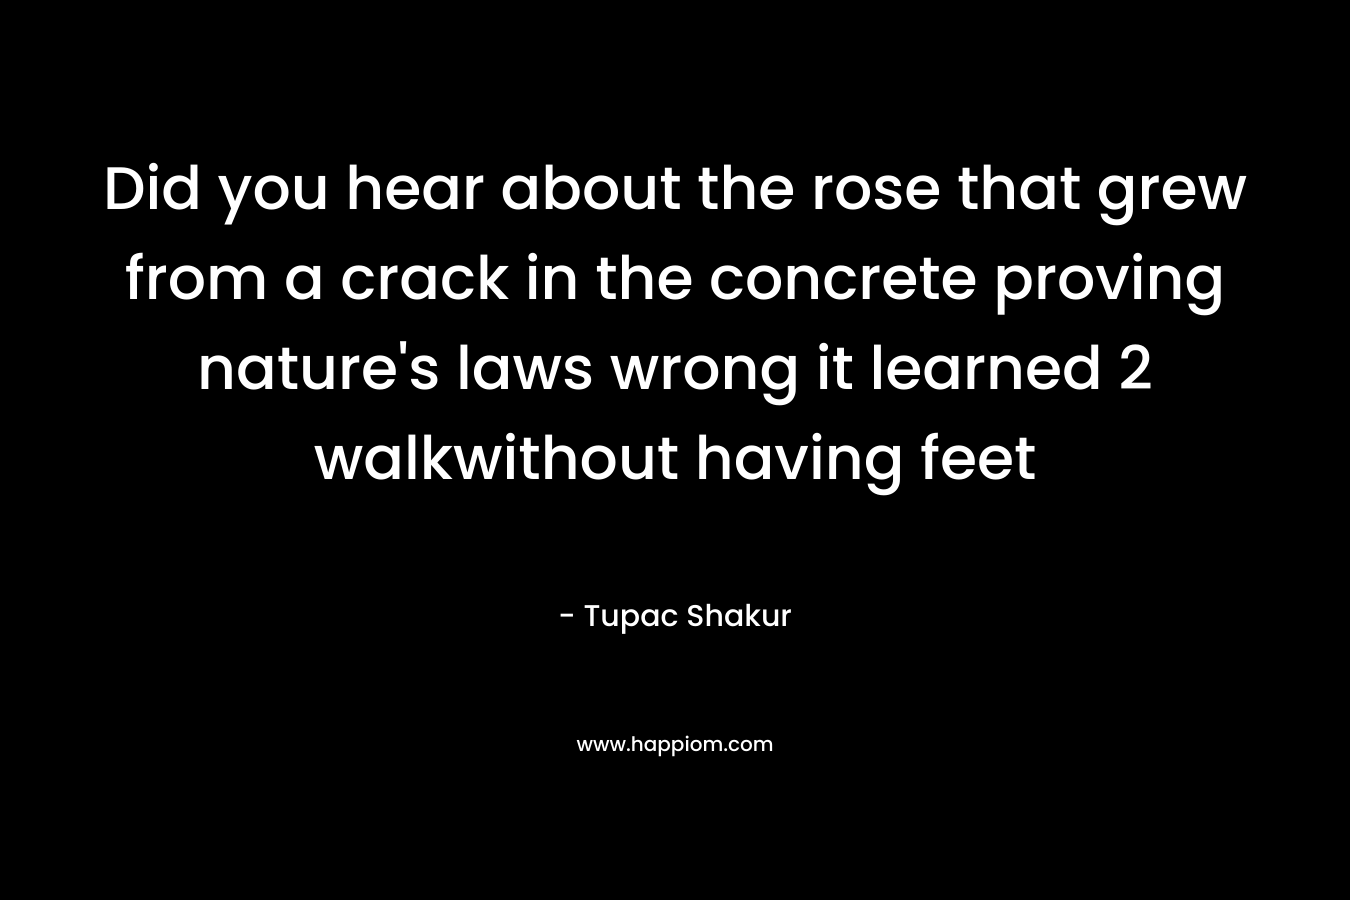 Did you hear about the rose that grew from a crack in the concrete proving nature’s laws wrong it learned 2 walkwithout having feet – Tupac Shakur